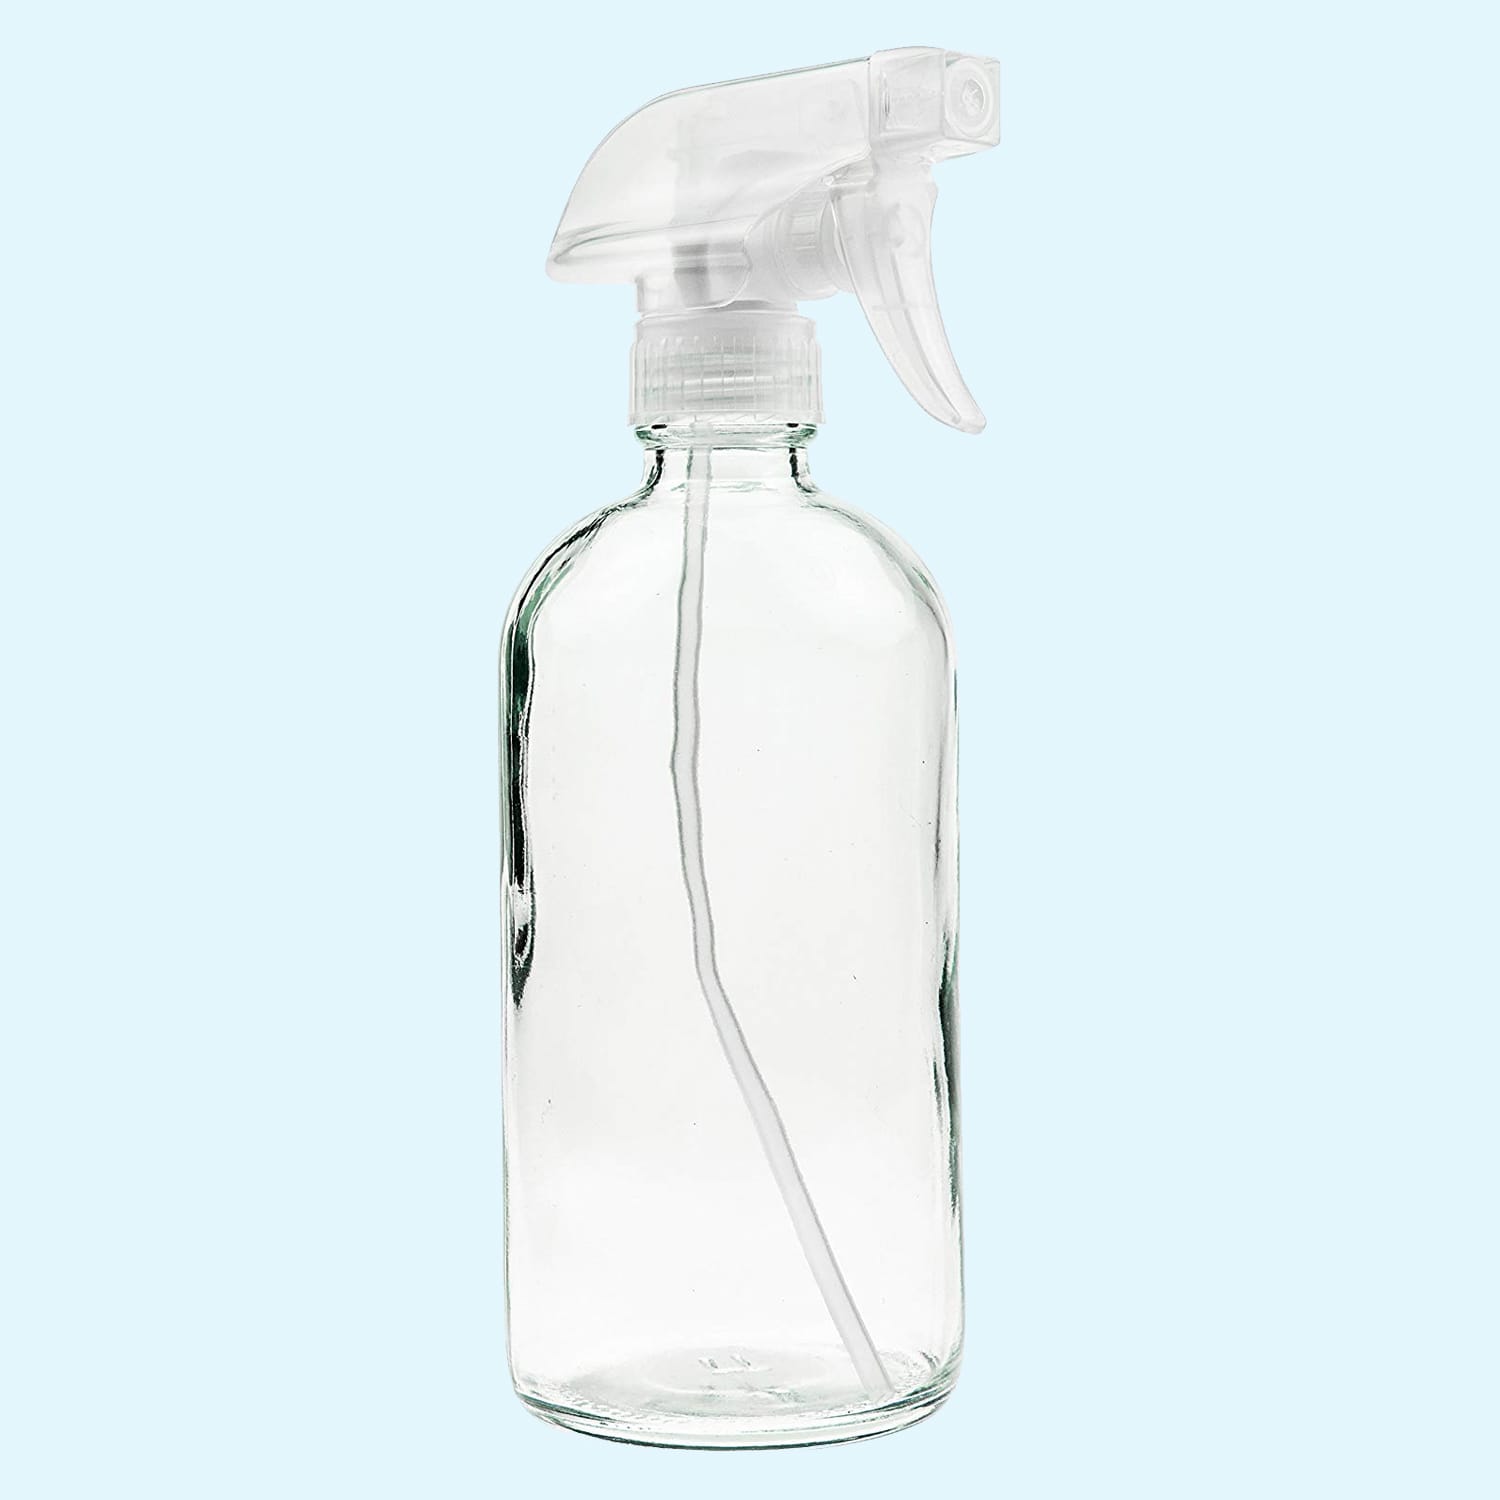 http://cdn.apartmenttherapy.info/image/upload/v1580152716/gen-workflow/product-listing/spray-bottle-cleaning.jpg